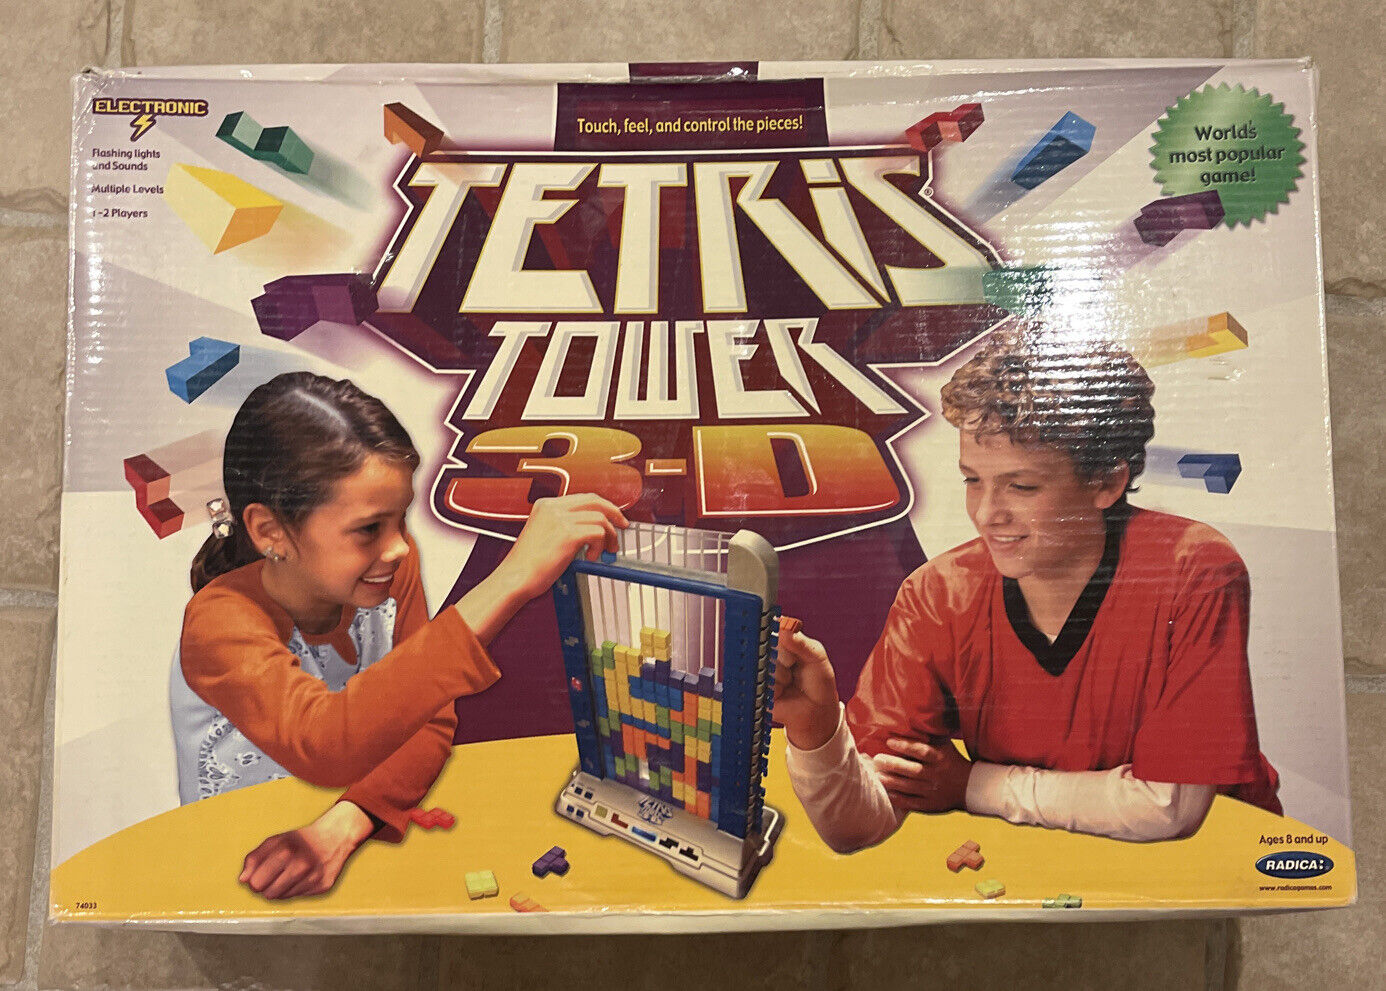 Tetris Tower 3D Electronic Game By Radica - 2003 Complete Works Family Fun 🔥